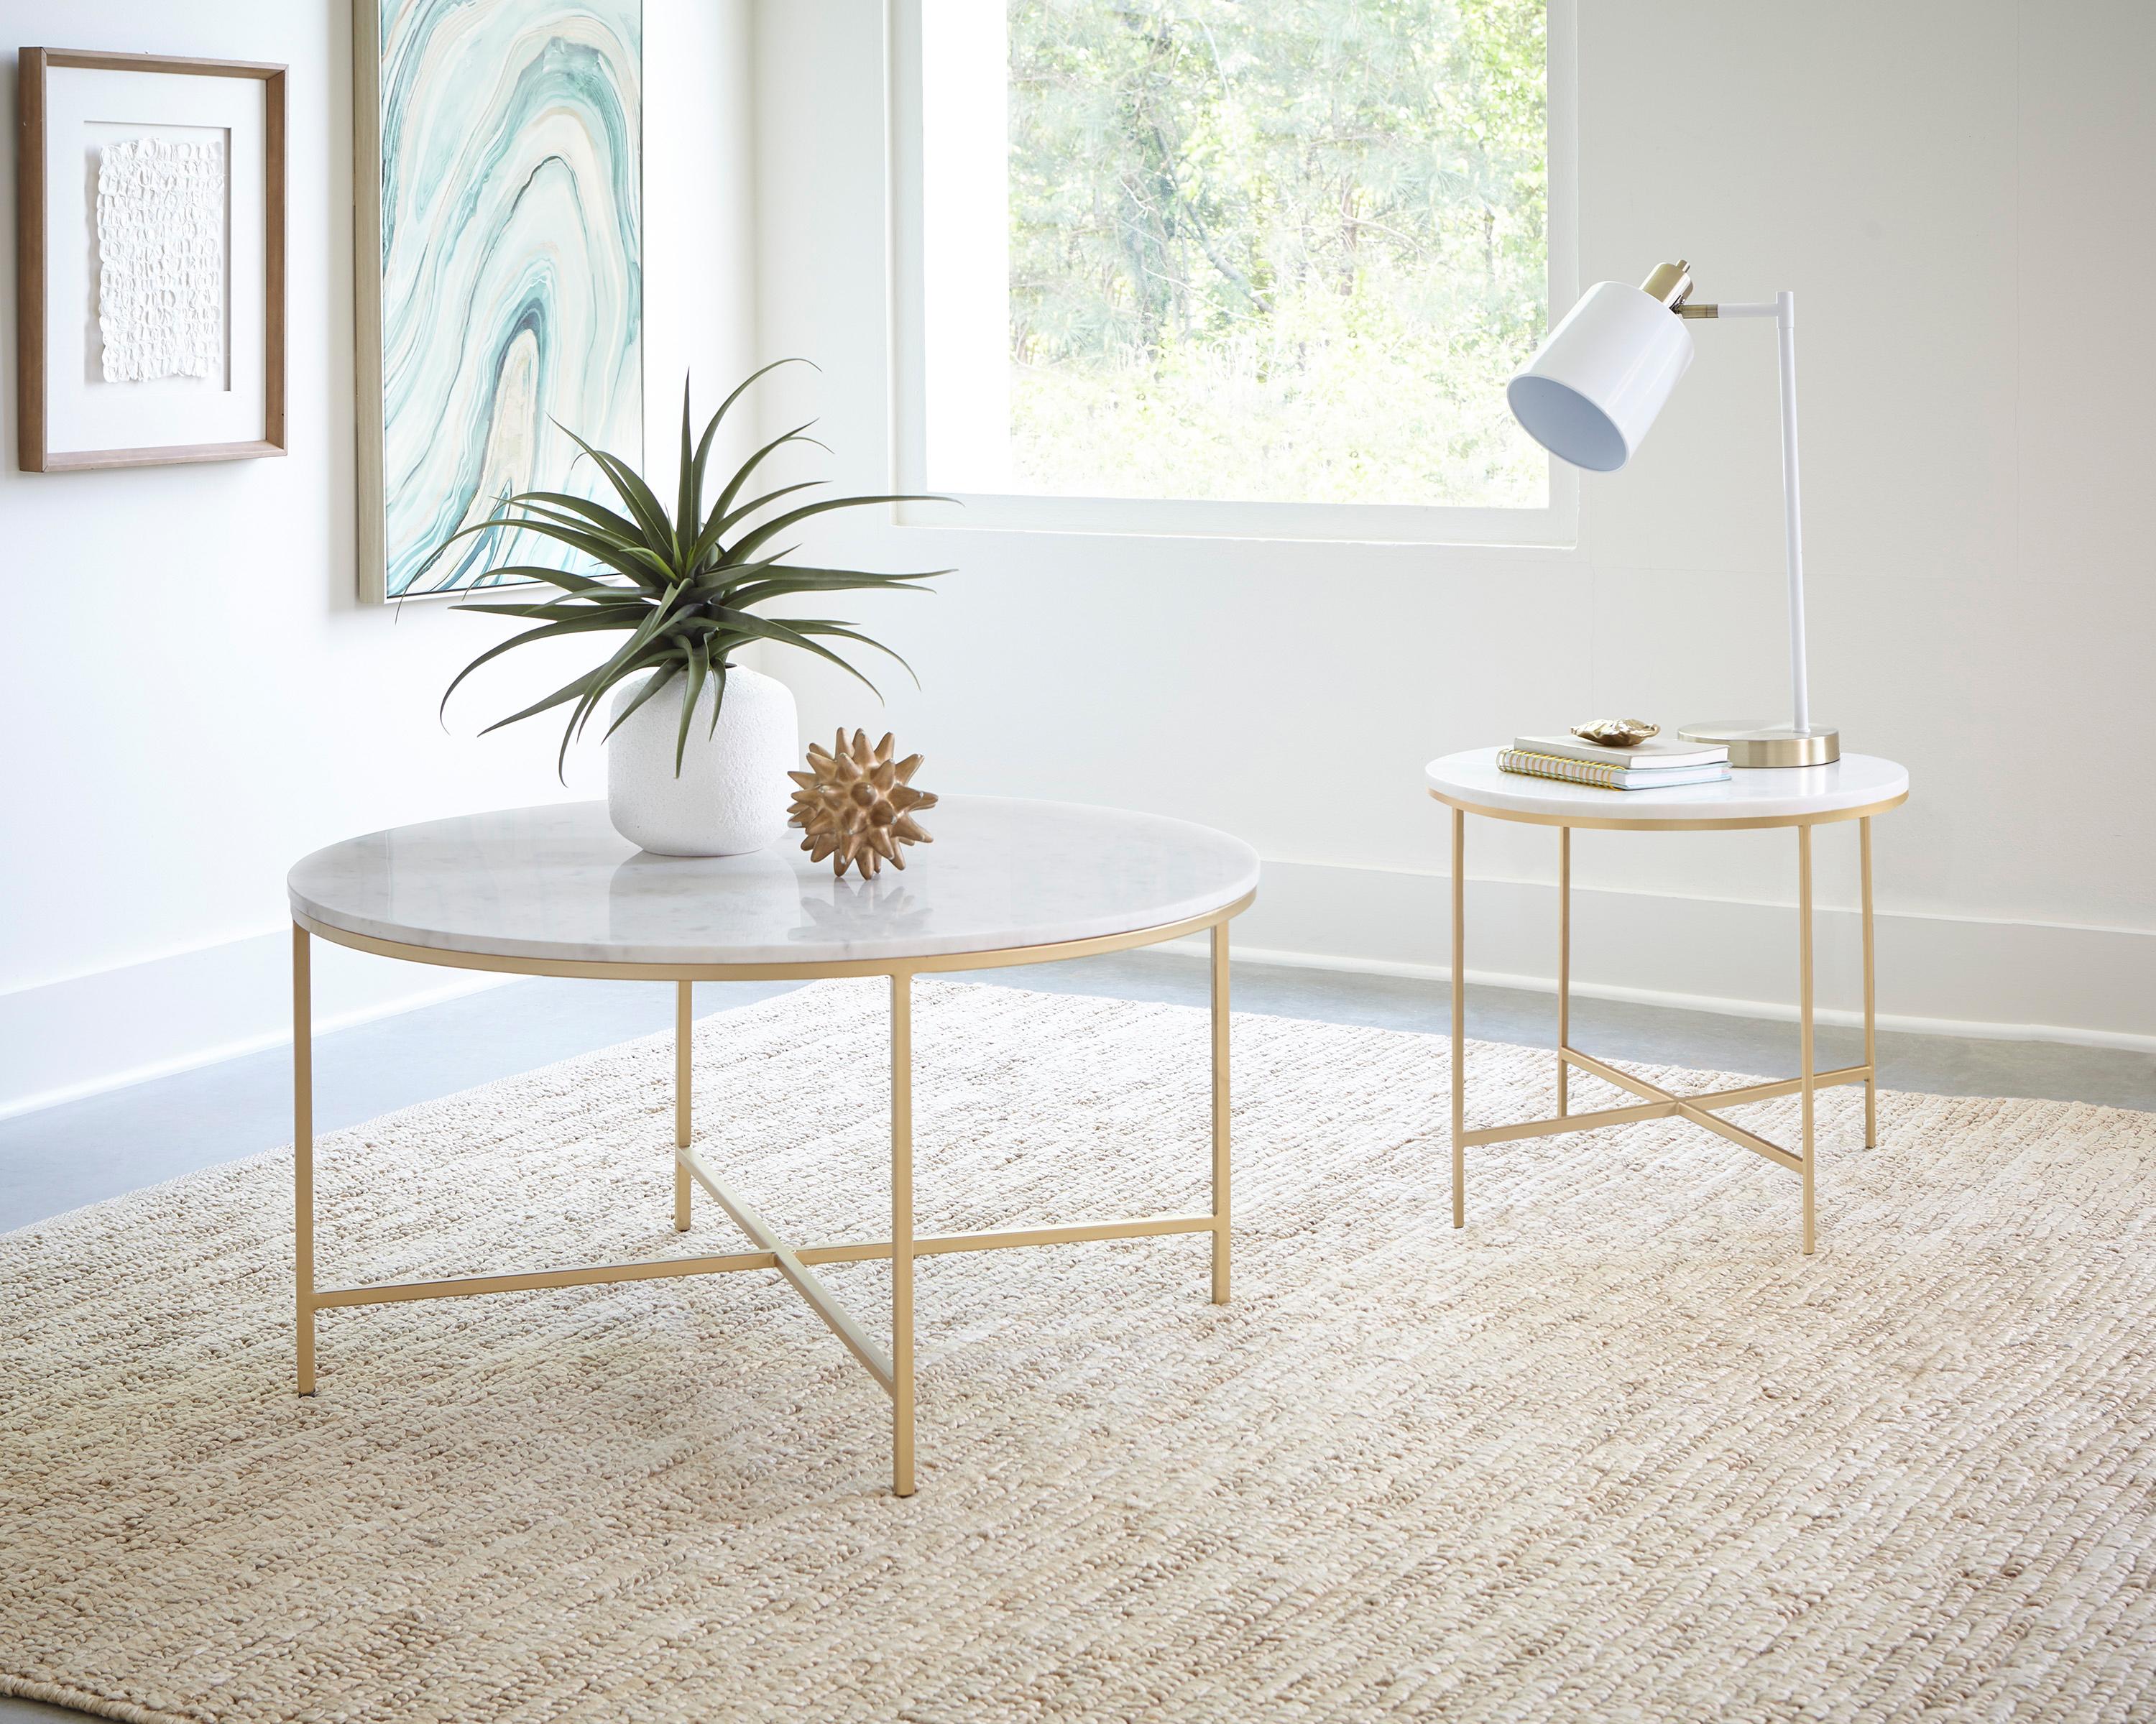 Contemporary Coffee Table Set 723208-S2 723208-S2 in White, Gold 